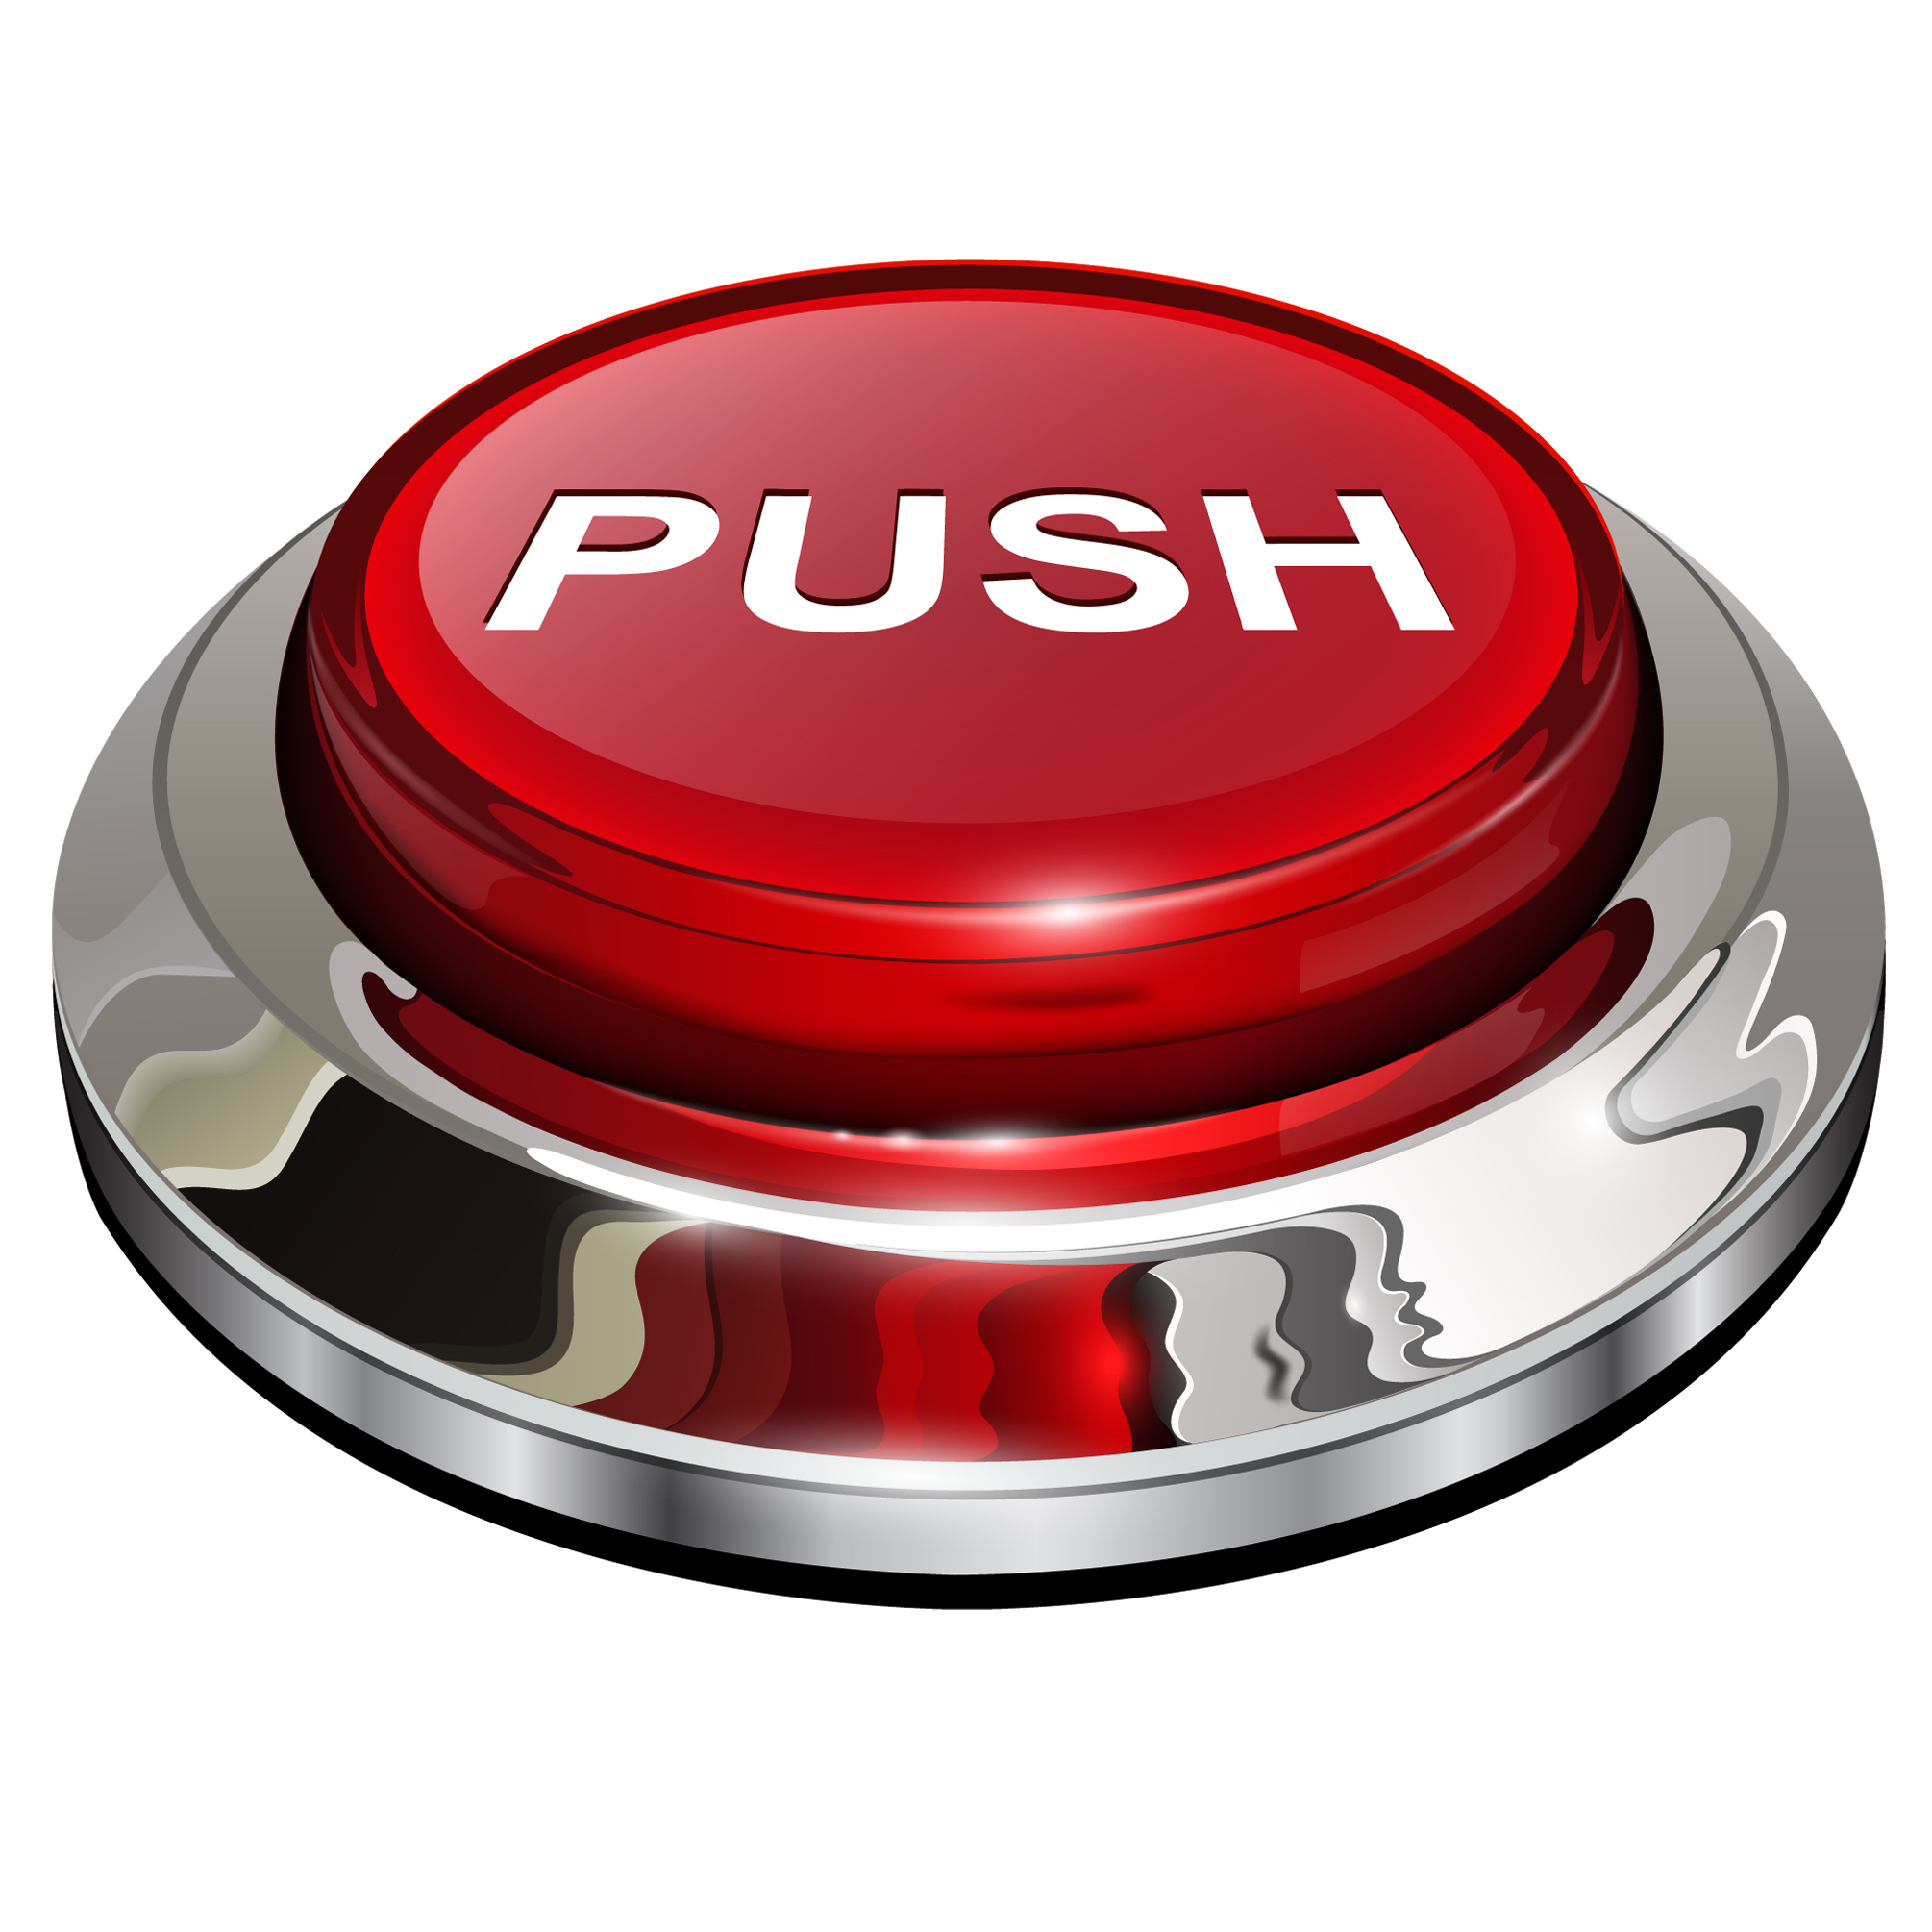 Are Other People Pushing Your Buttons?